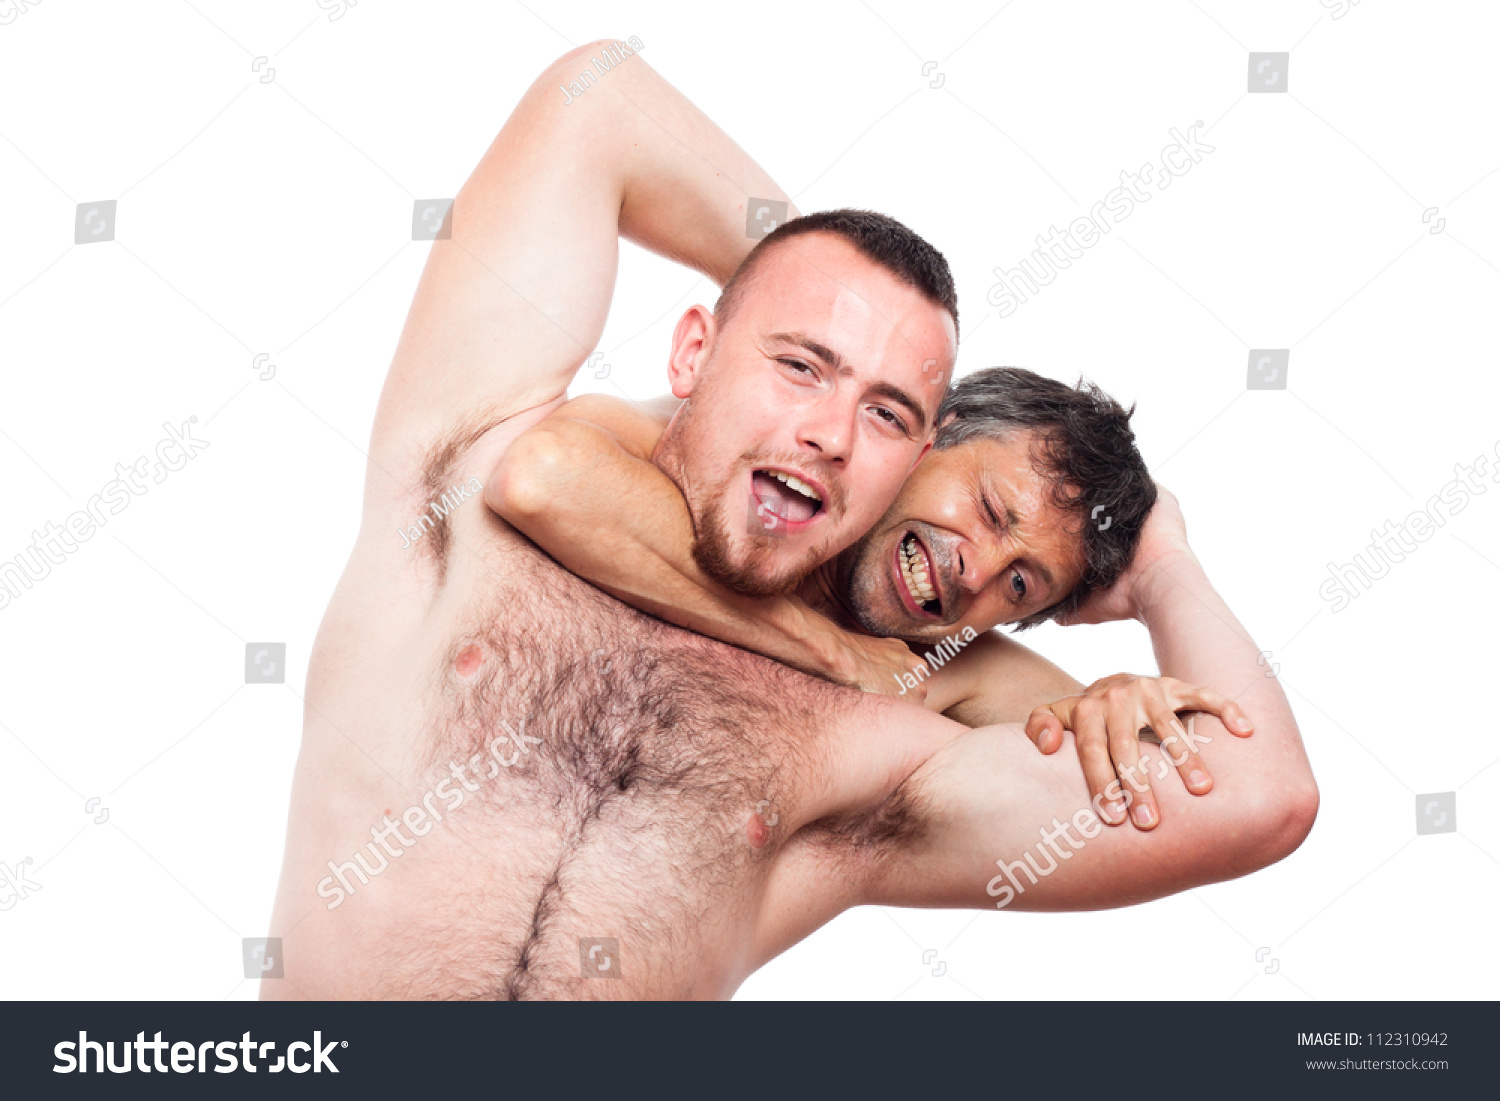 Two Nude Men 100